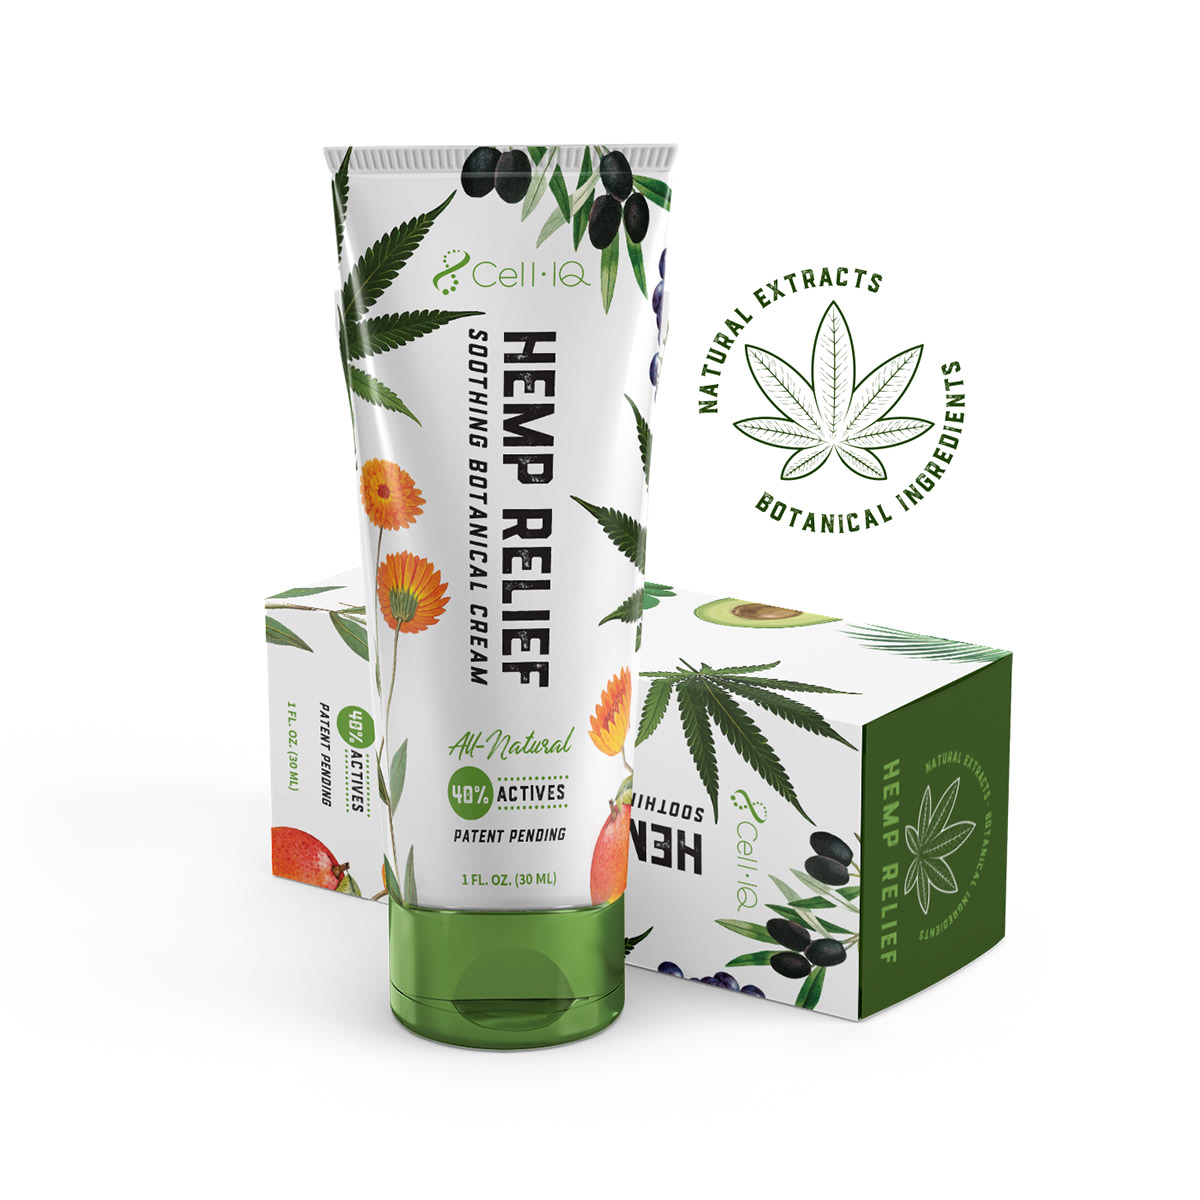 Botanicals Extracts CBD cream energy shot bottles Hemp Relief inspire Nutritional Health pantone colors powdered drink mix Tube packaging vitamins and minerals